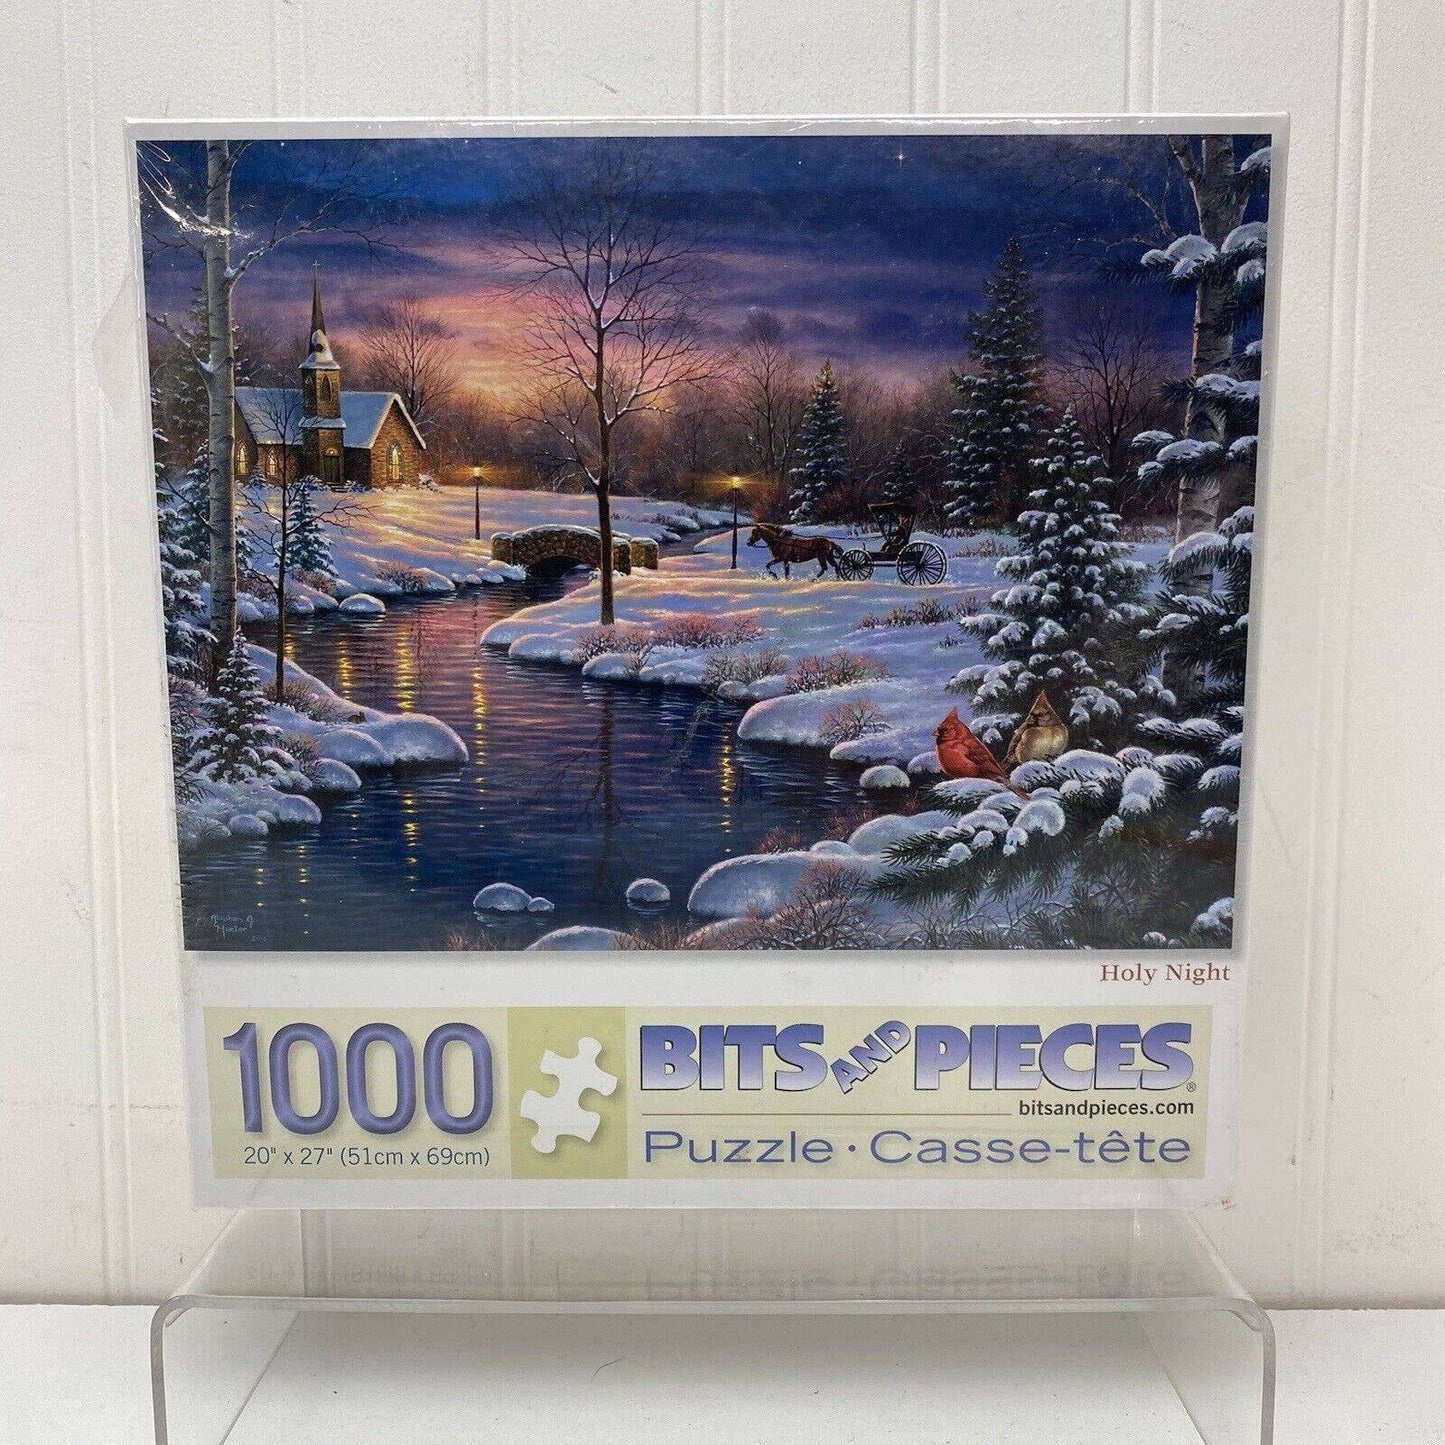 Lot of 4 Factory Sealed 1000 Piece Jigsaw Puzzles - Bits and Pieces, Etc.